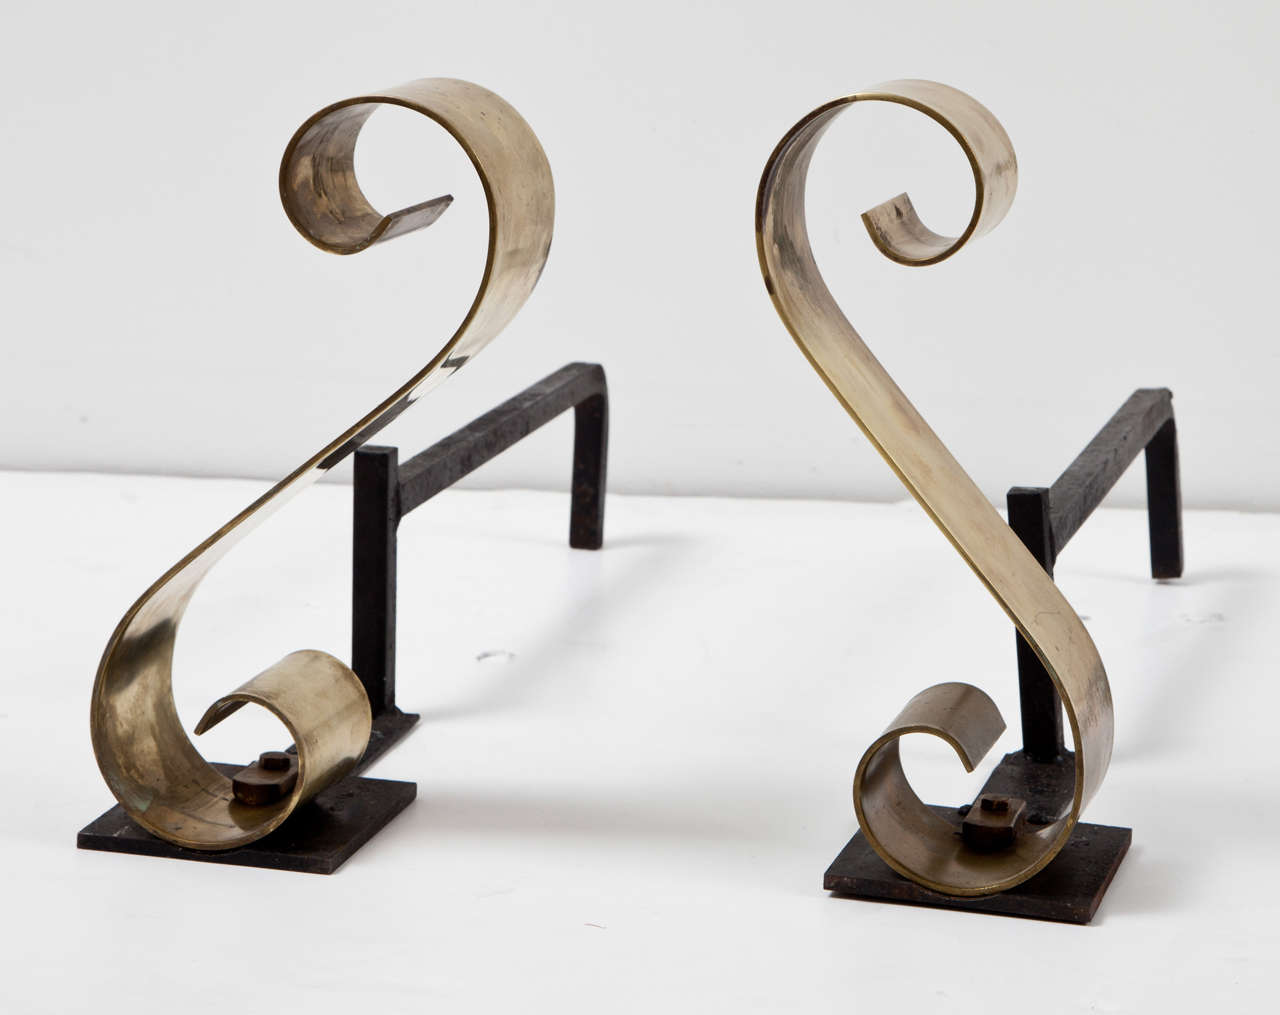 Scroll-design andirons in a French style made of polished brass with black iron base  USA, circa 1950.  Brass features original patina.

May be seen at theDoor 15, Space 65 in Hudson NY 12534.